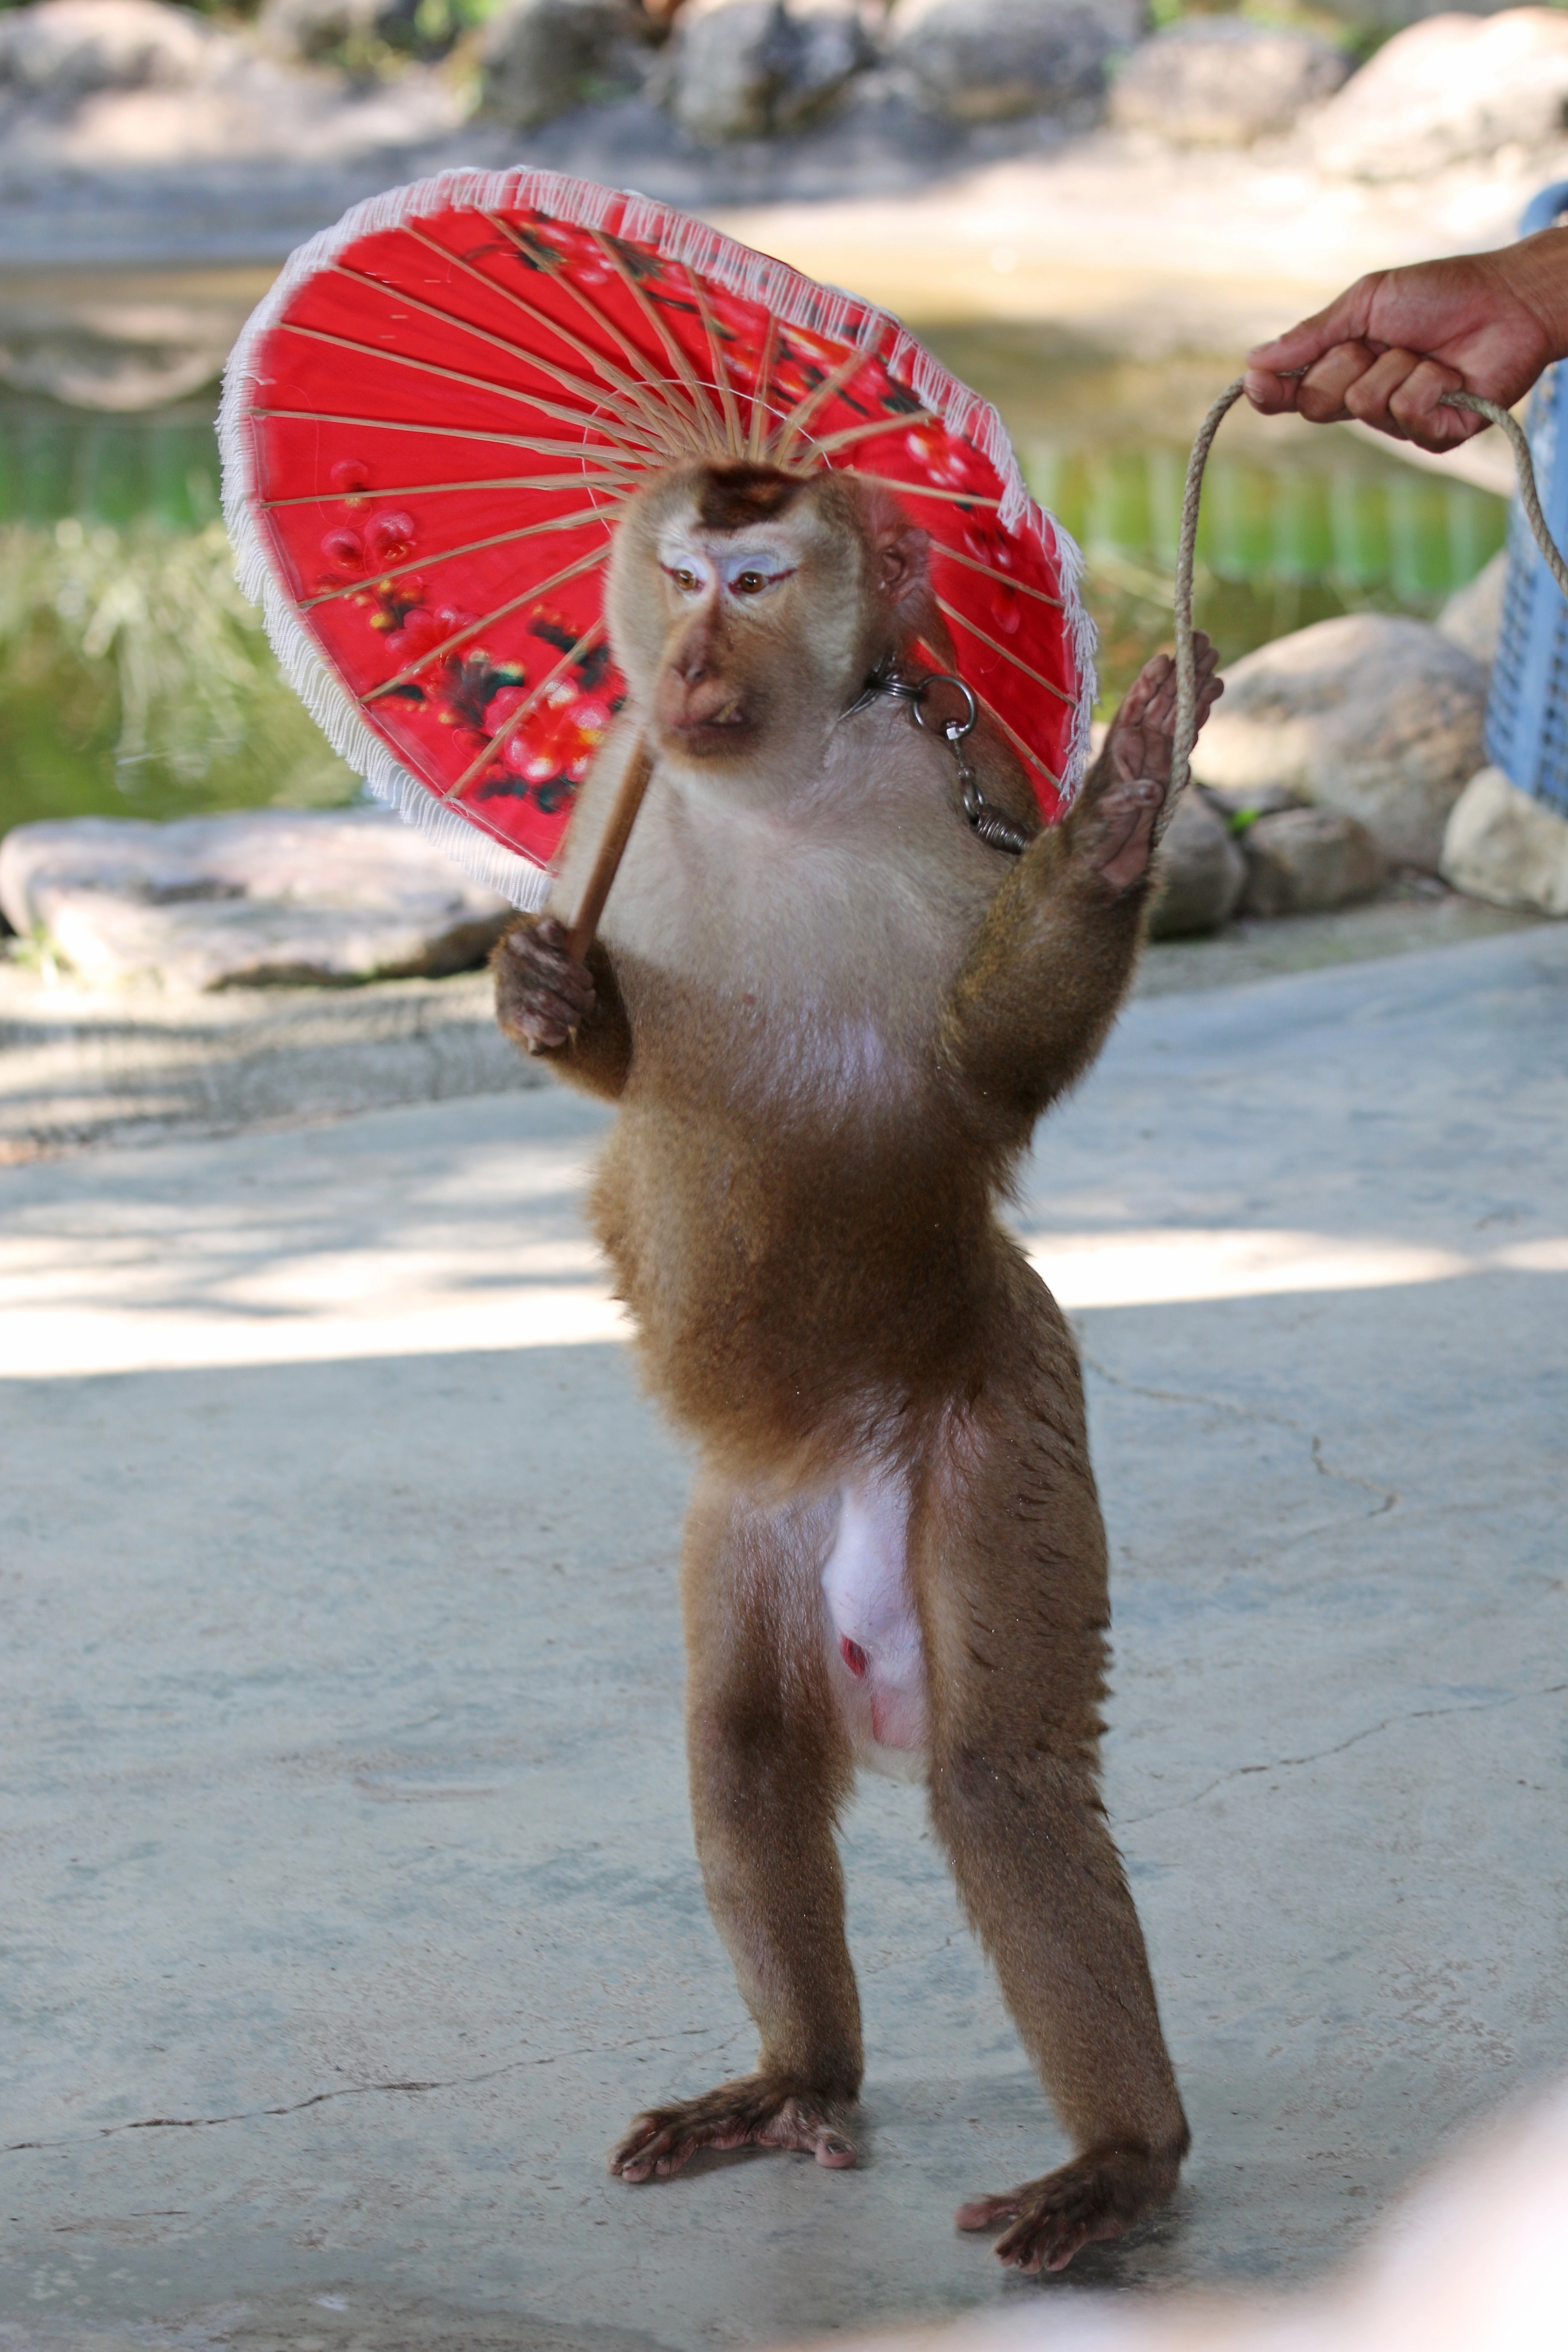 A macaque performs for tourists at an attraction in Thailand